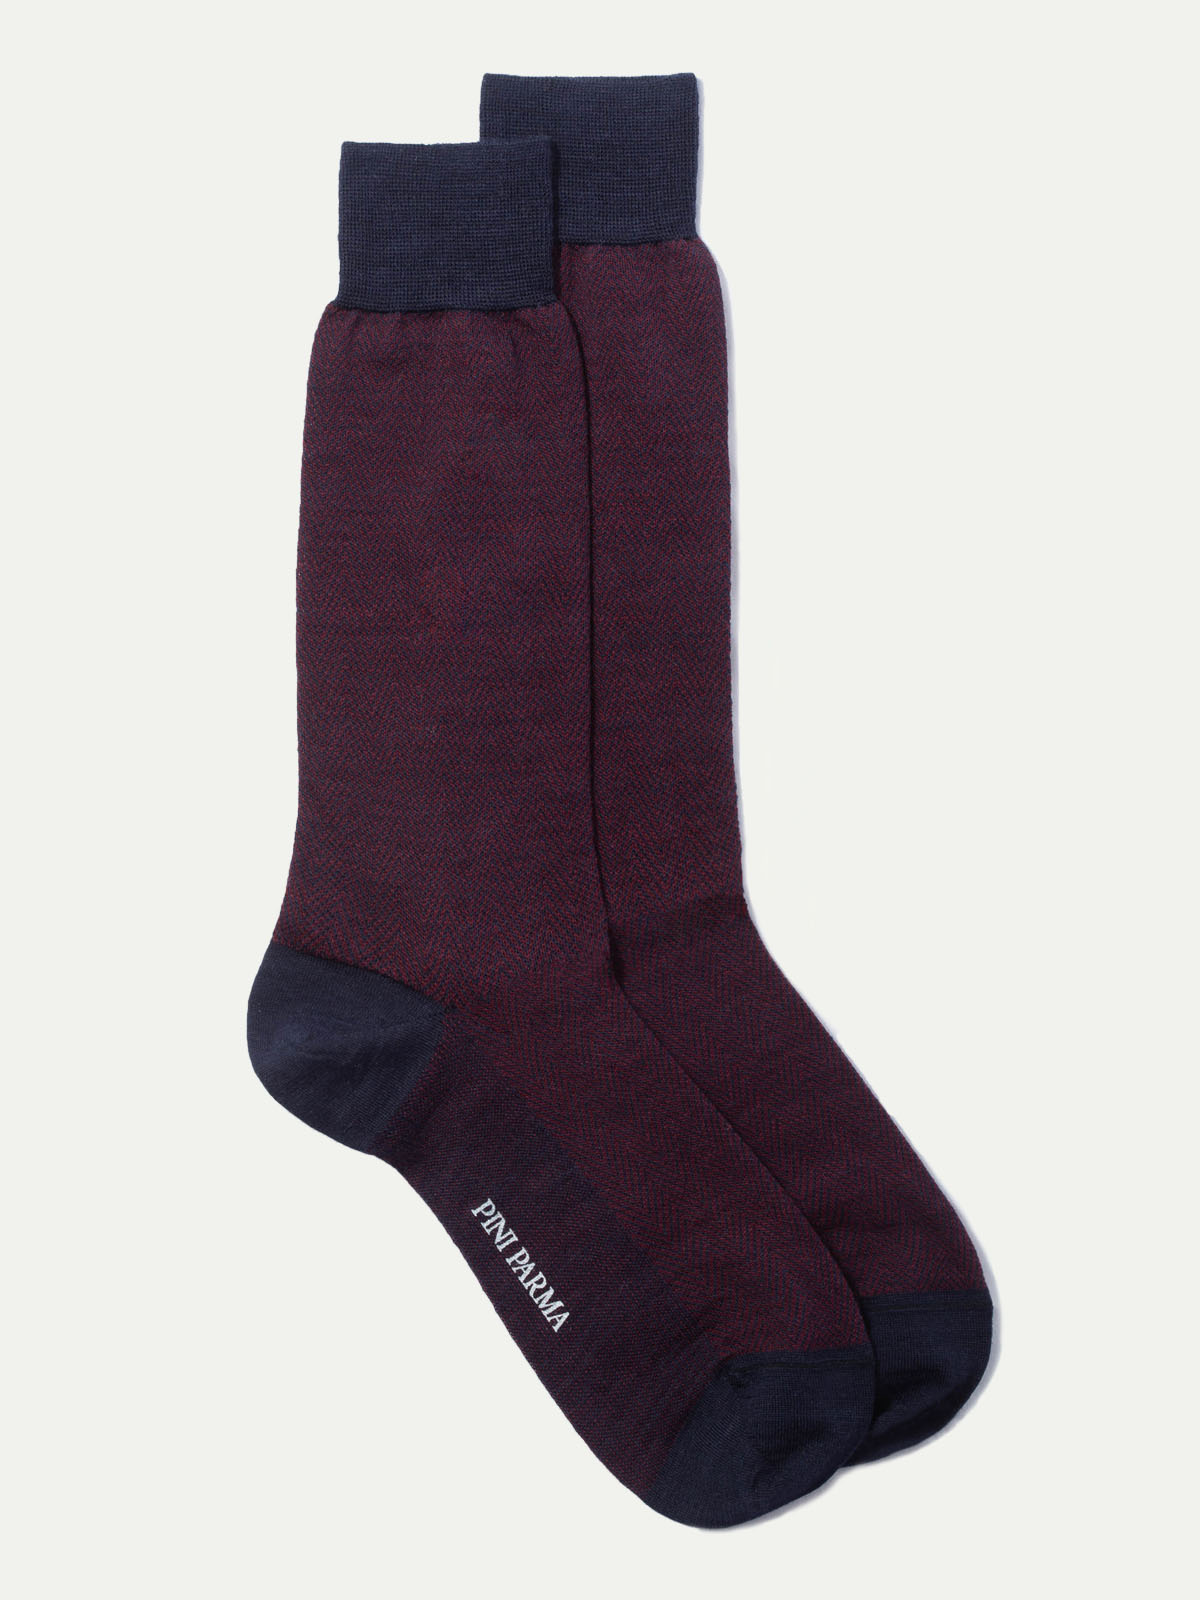 Chaussettes courtes à chevrons bordeaux - Made in Italy